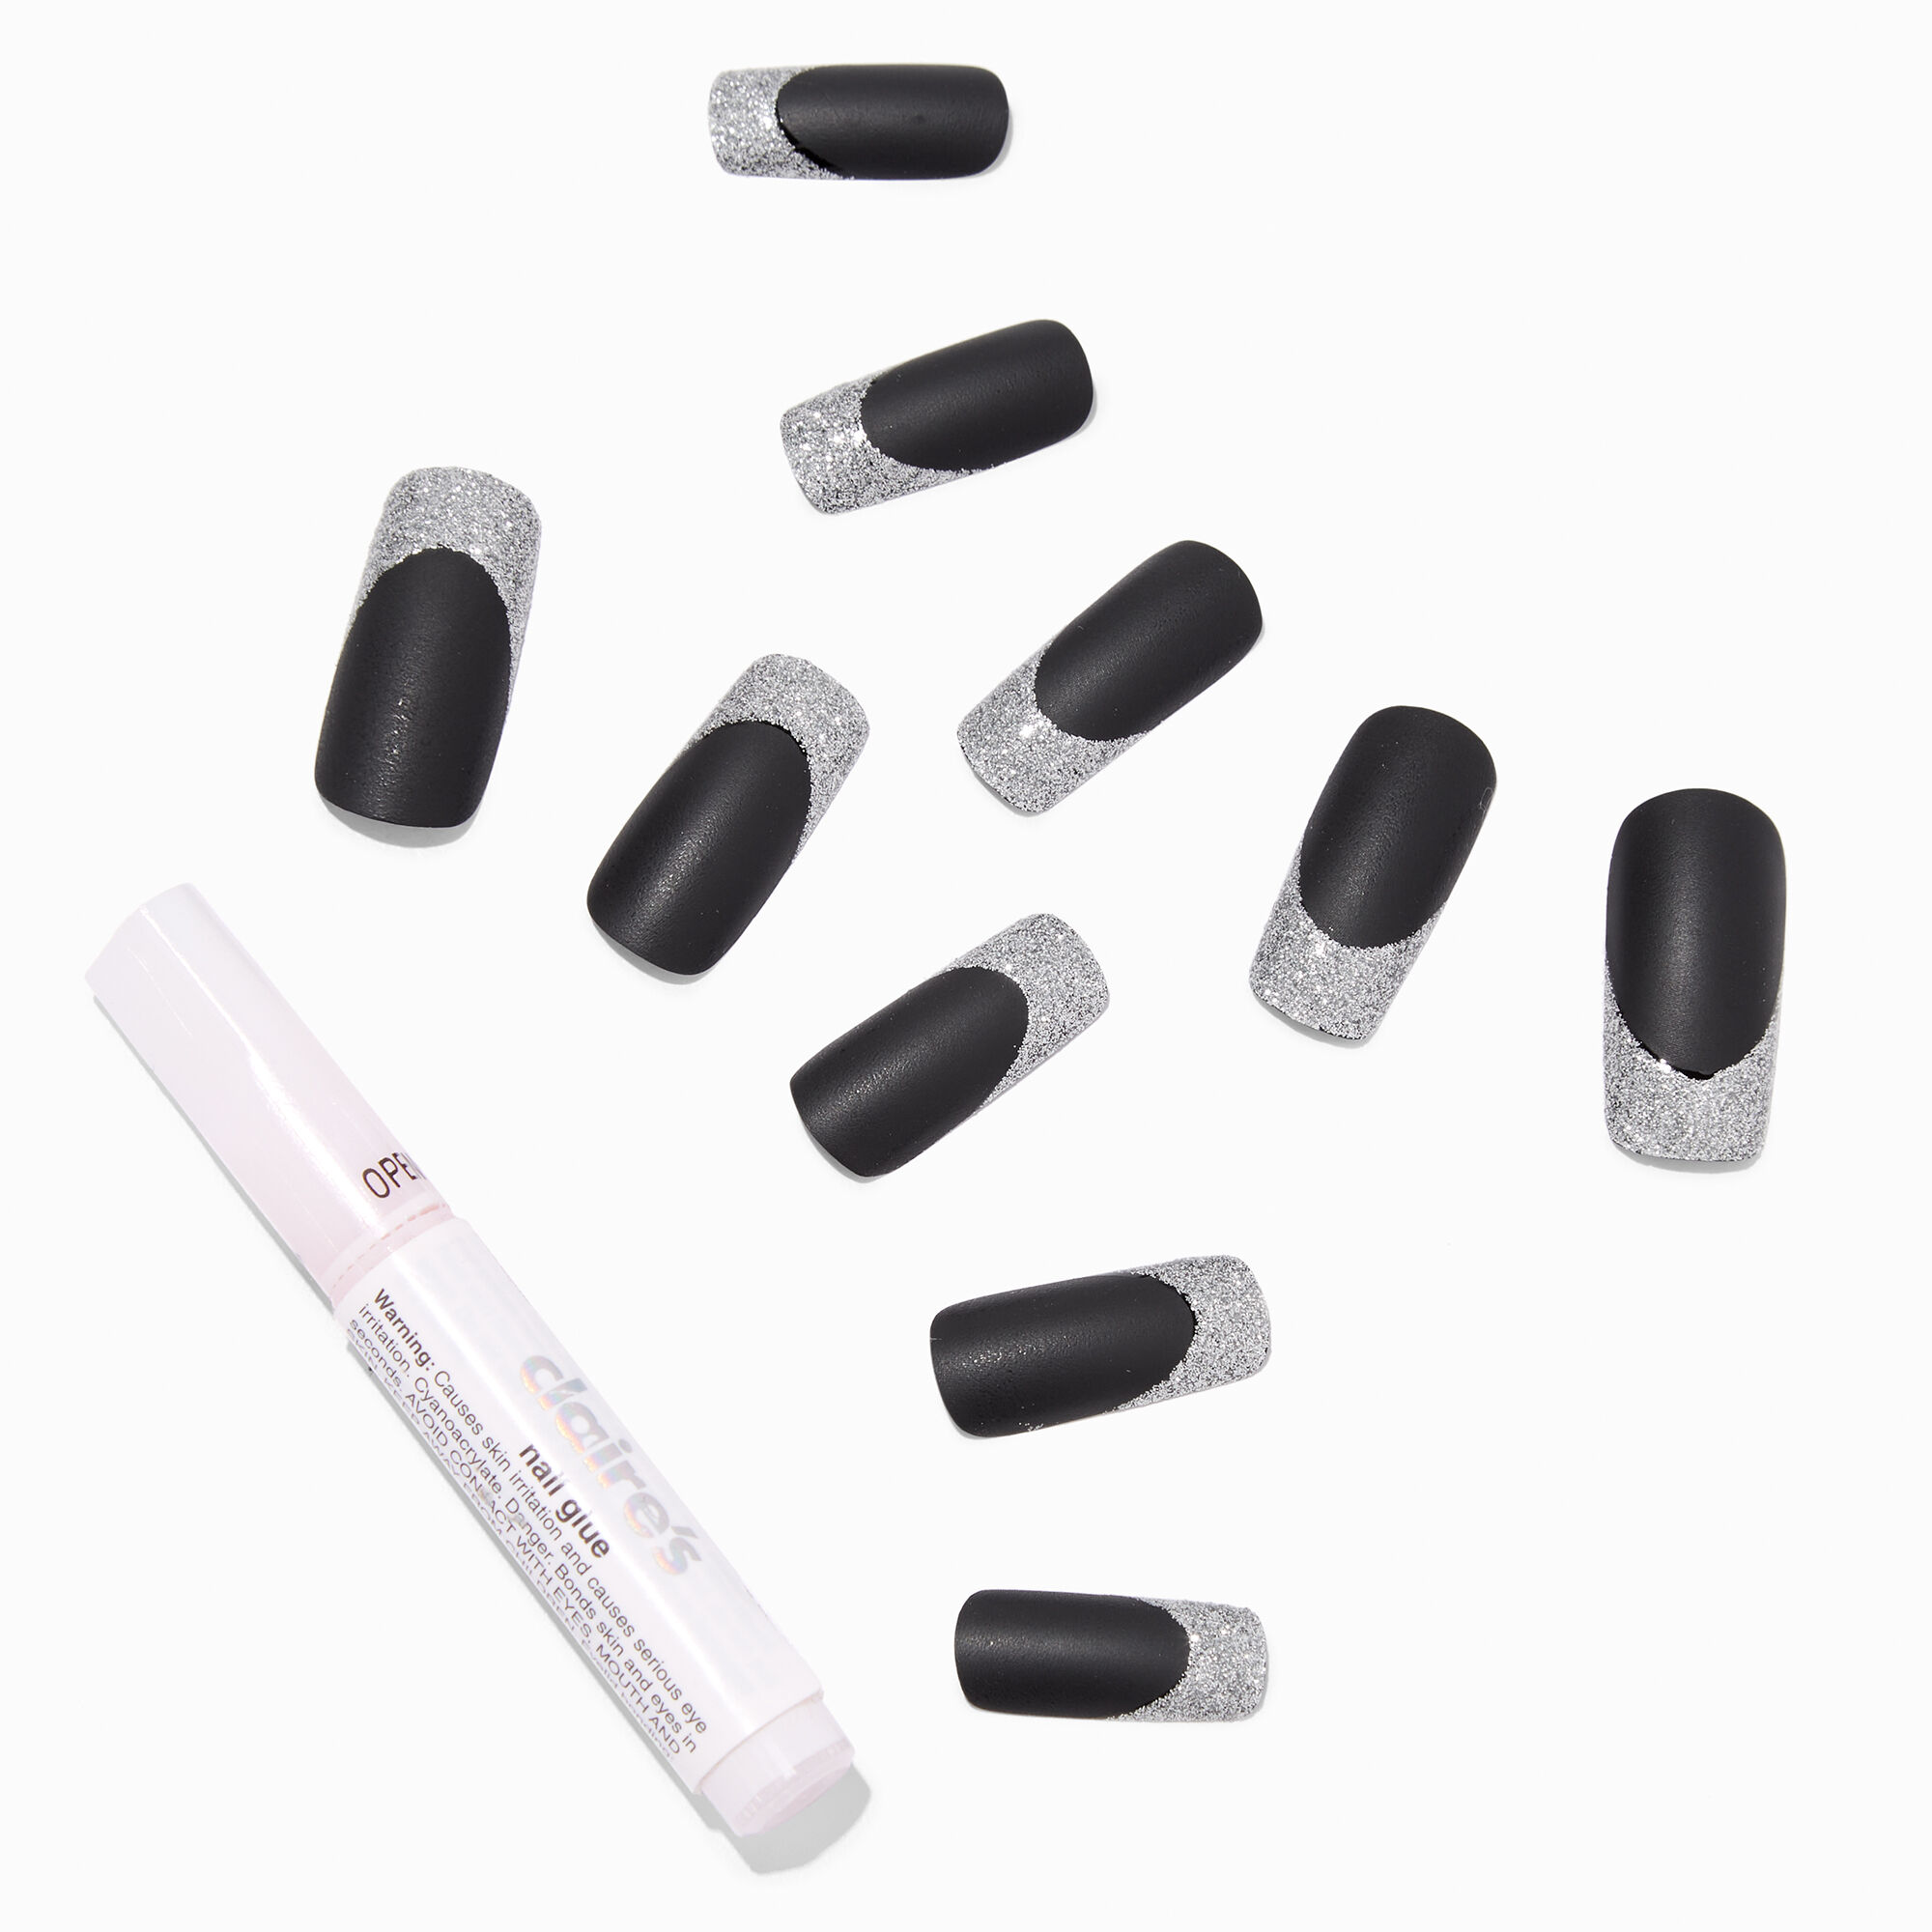 View Claires Silver Glitter Tip Long Square Vegan Faux Nail Set 24 Pack Black information